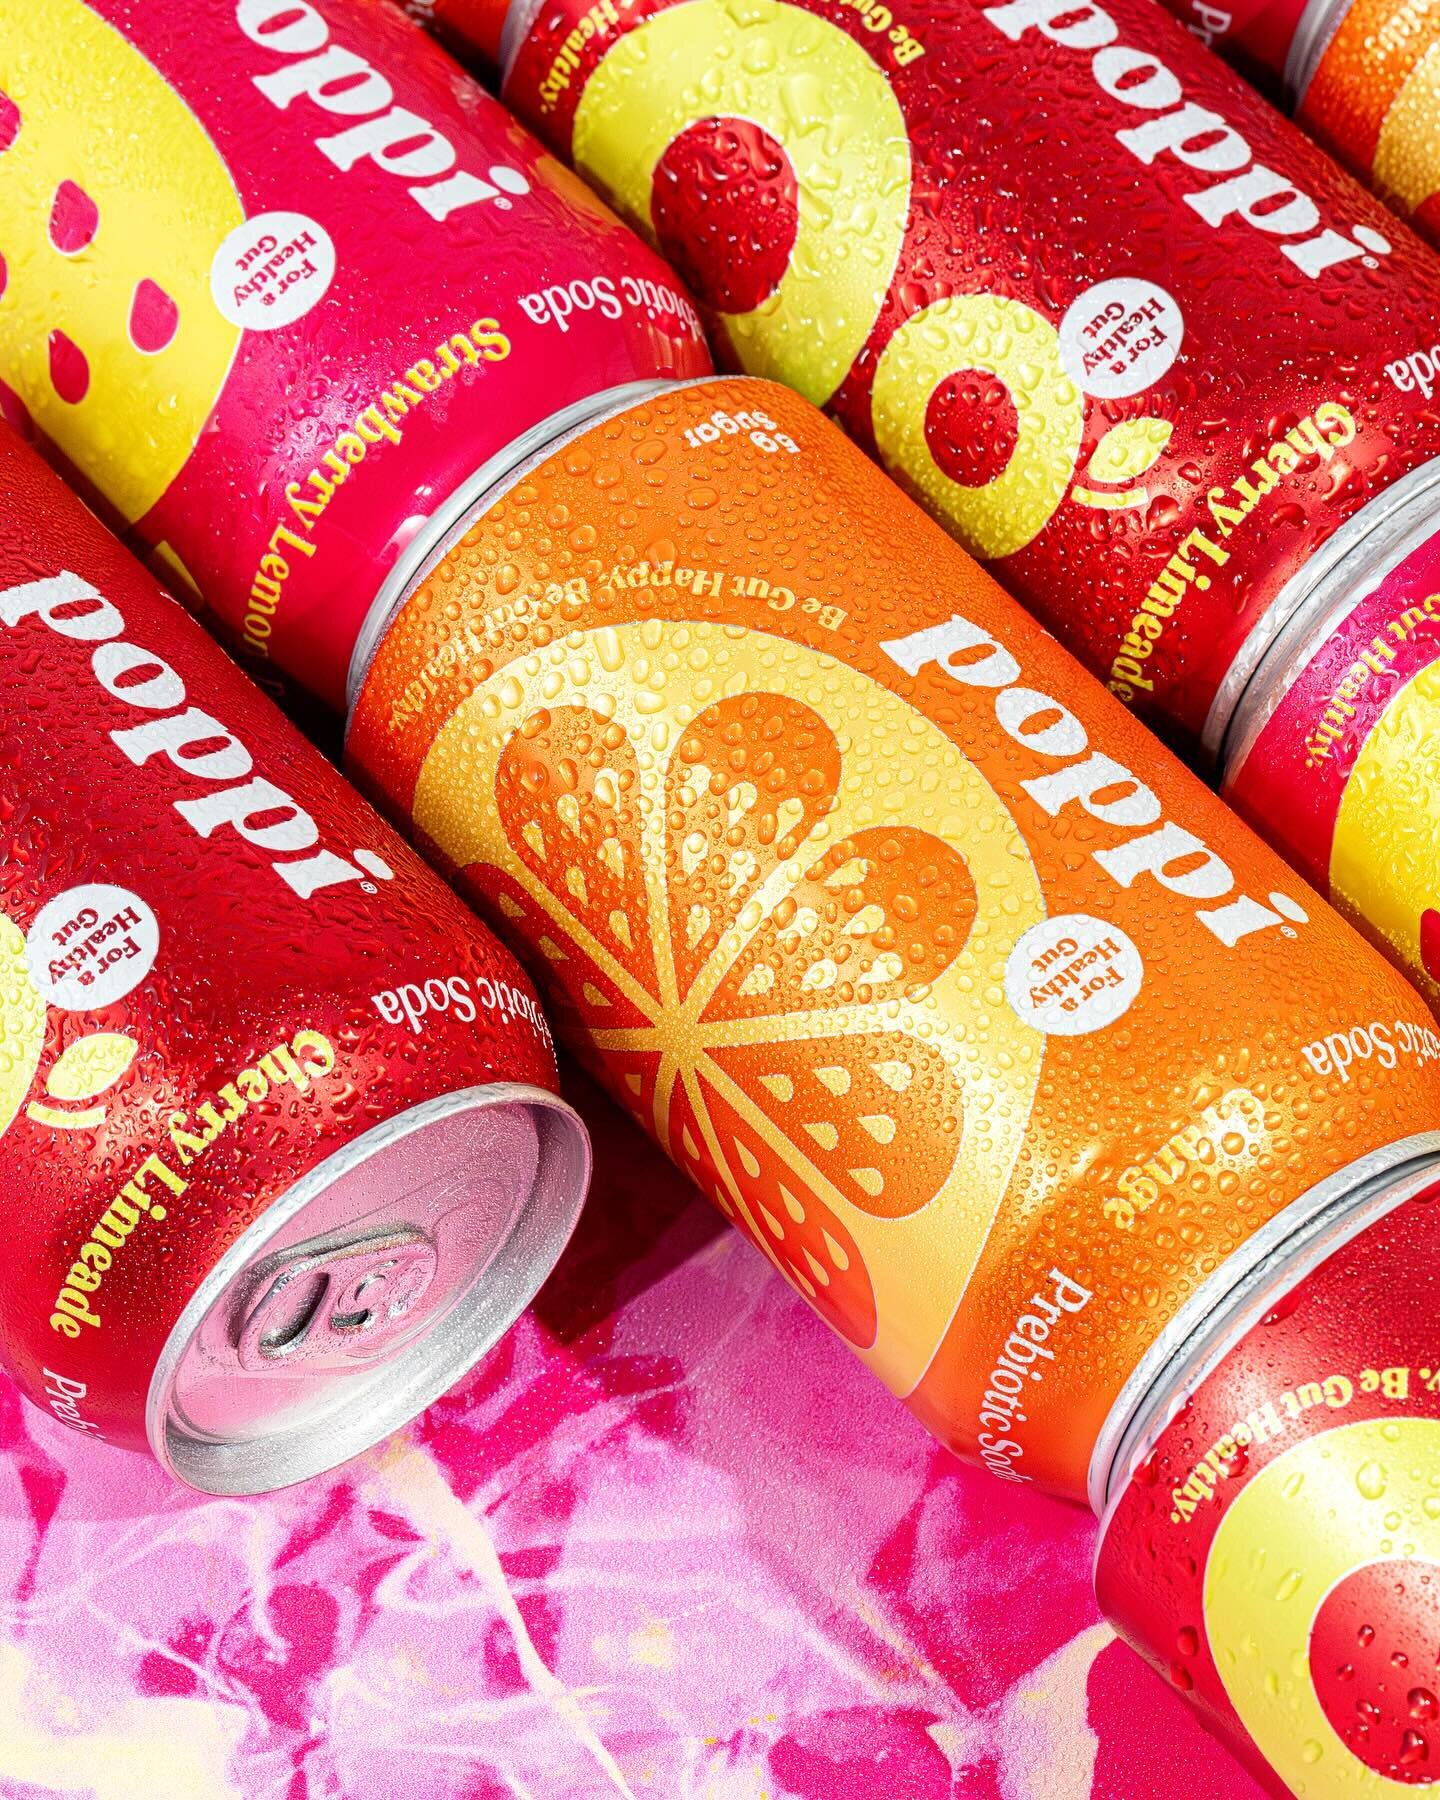 Capturing the vibrant, crisp vibes of Poppi&rsquo;s packaging &mdash; where every details pops. 🫧 

Personal project with @drinkpoppi 

.
.
.
#productphotography #commercialphotographer #drinkpoppi #poppi #healthysoda #sodaalternative #guthealth #ap